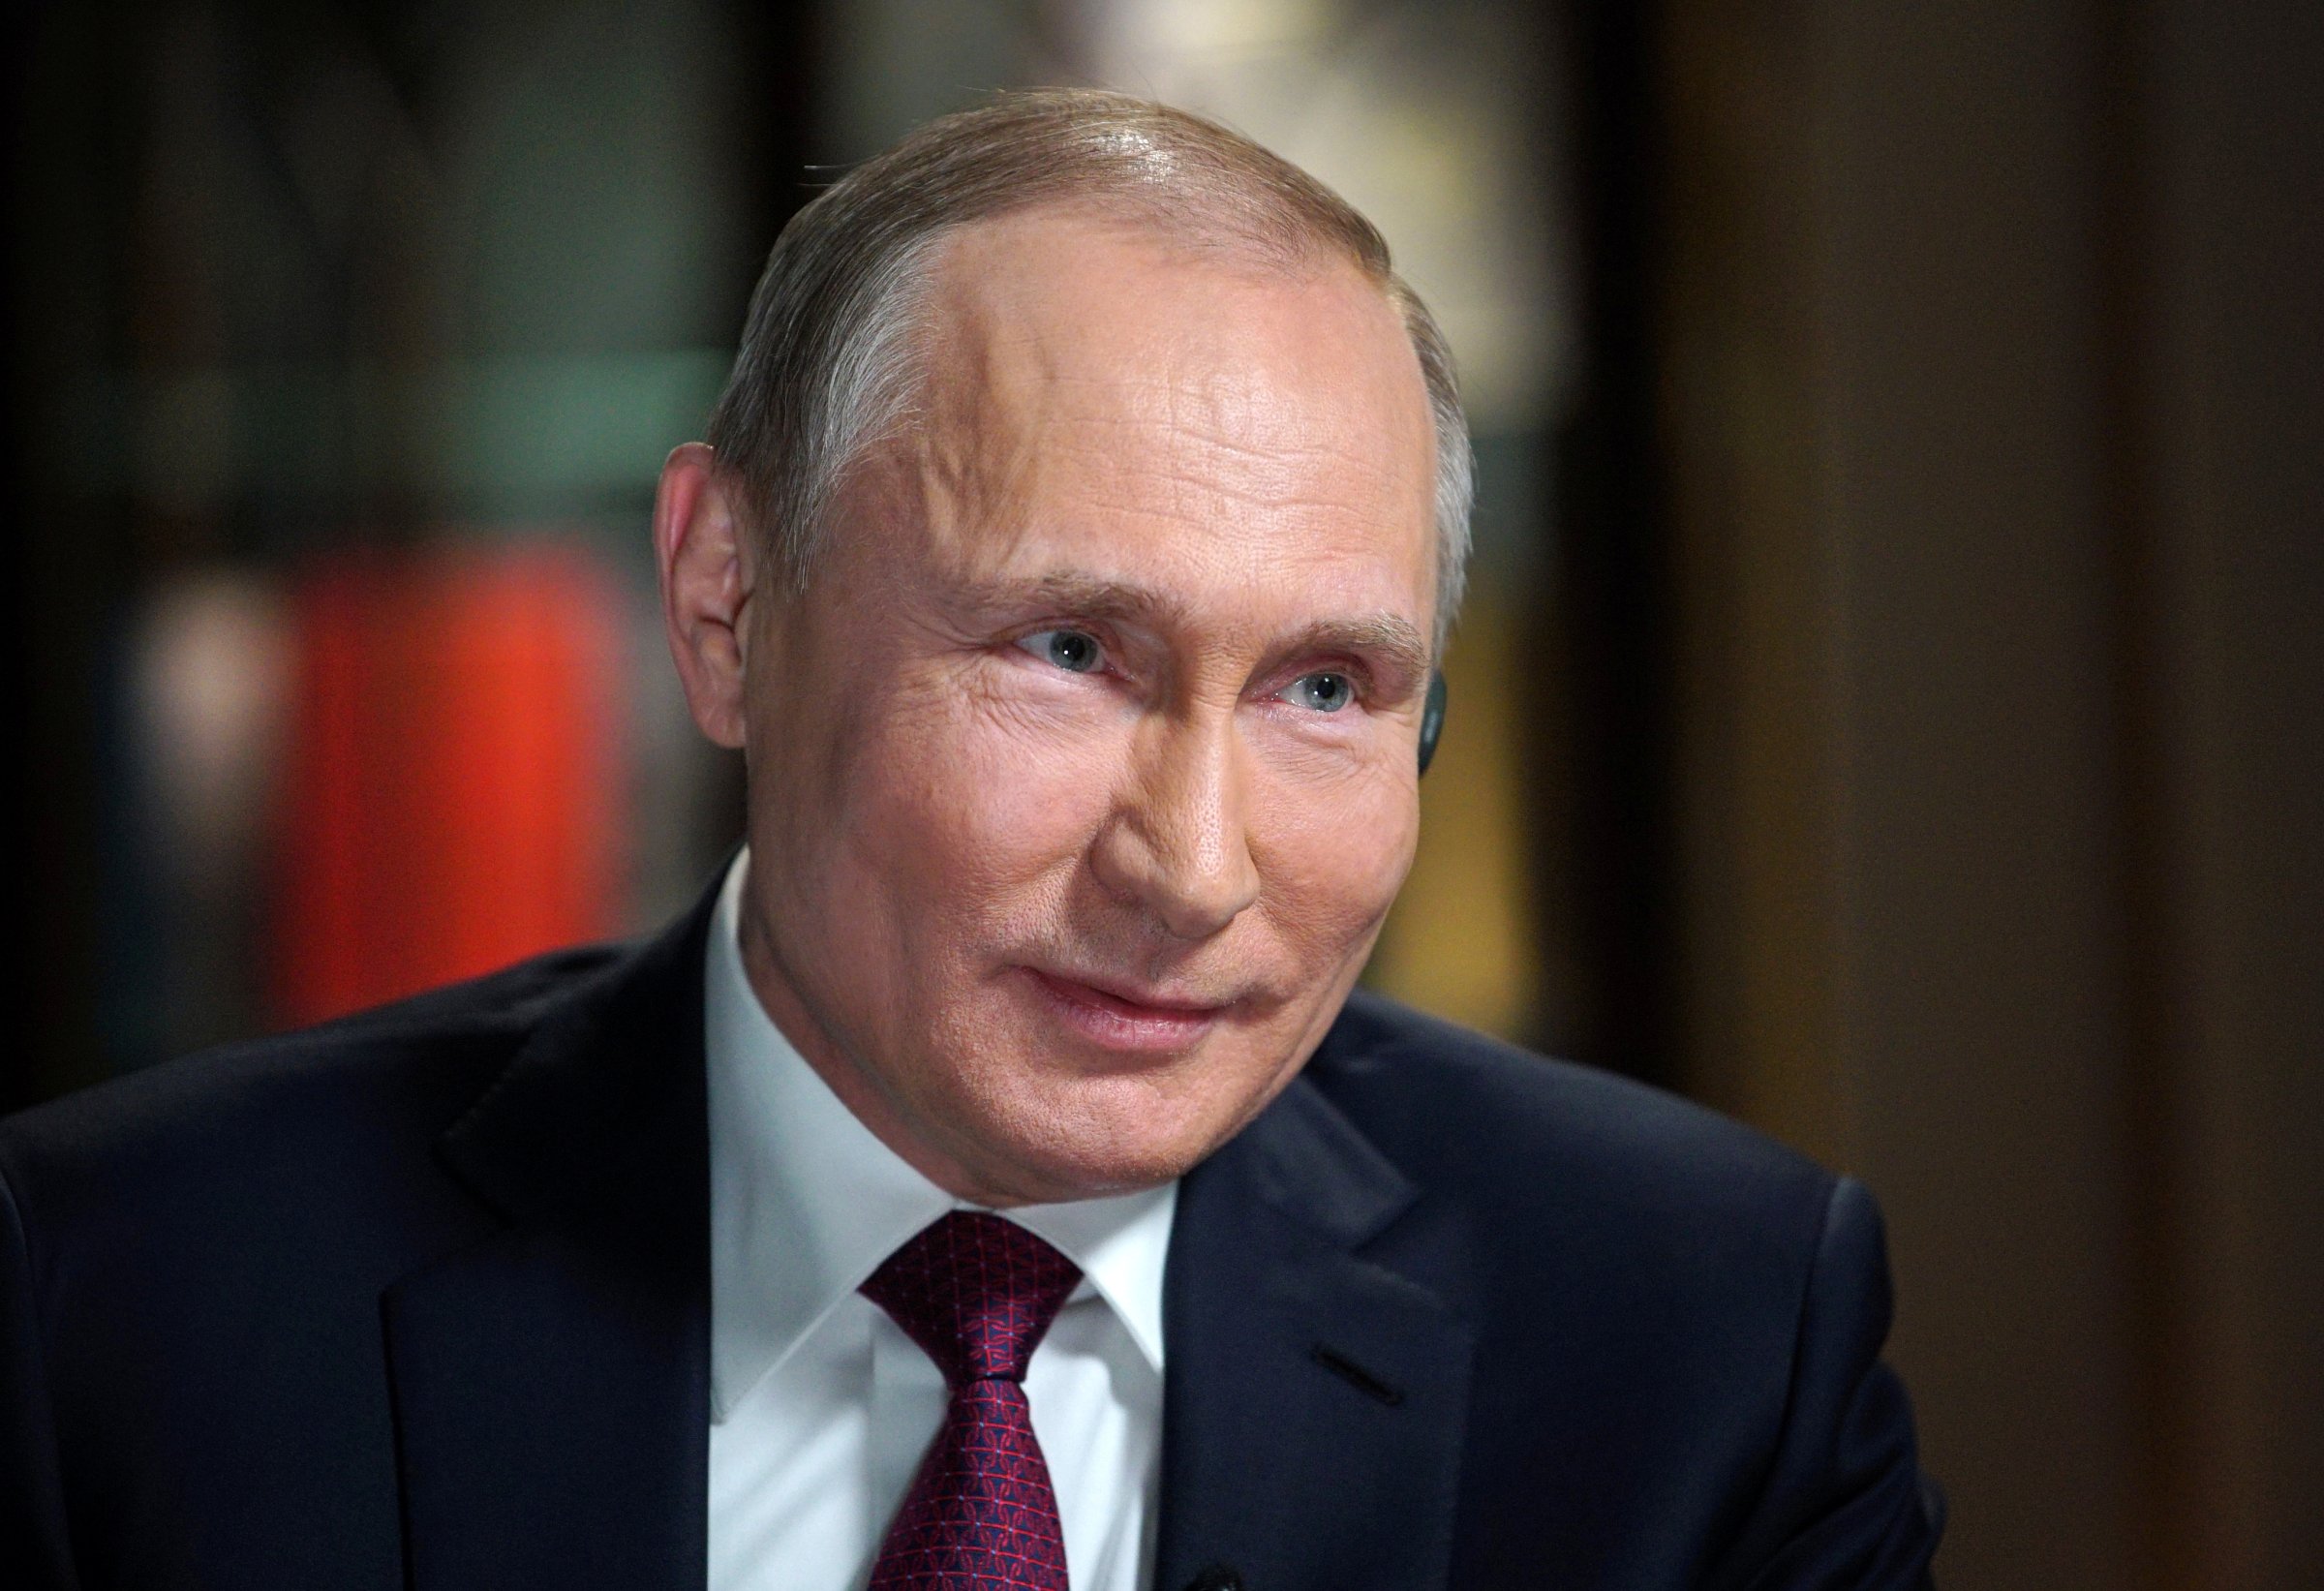 Russian President Putin attends an interview with NBC's journalist Kelly in Kaliningrad